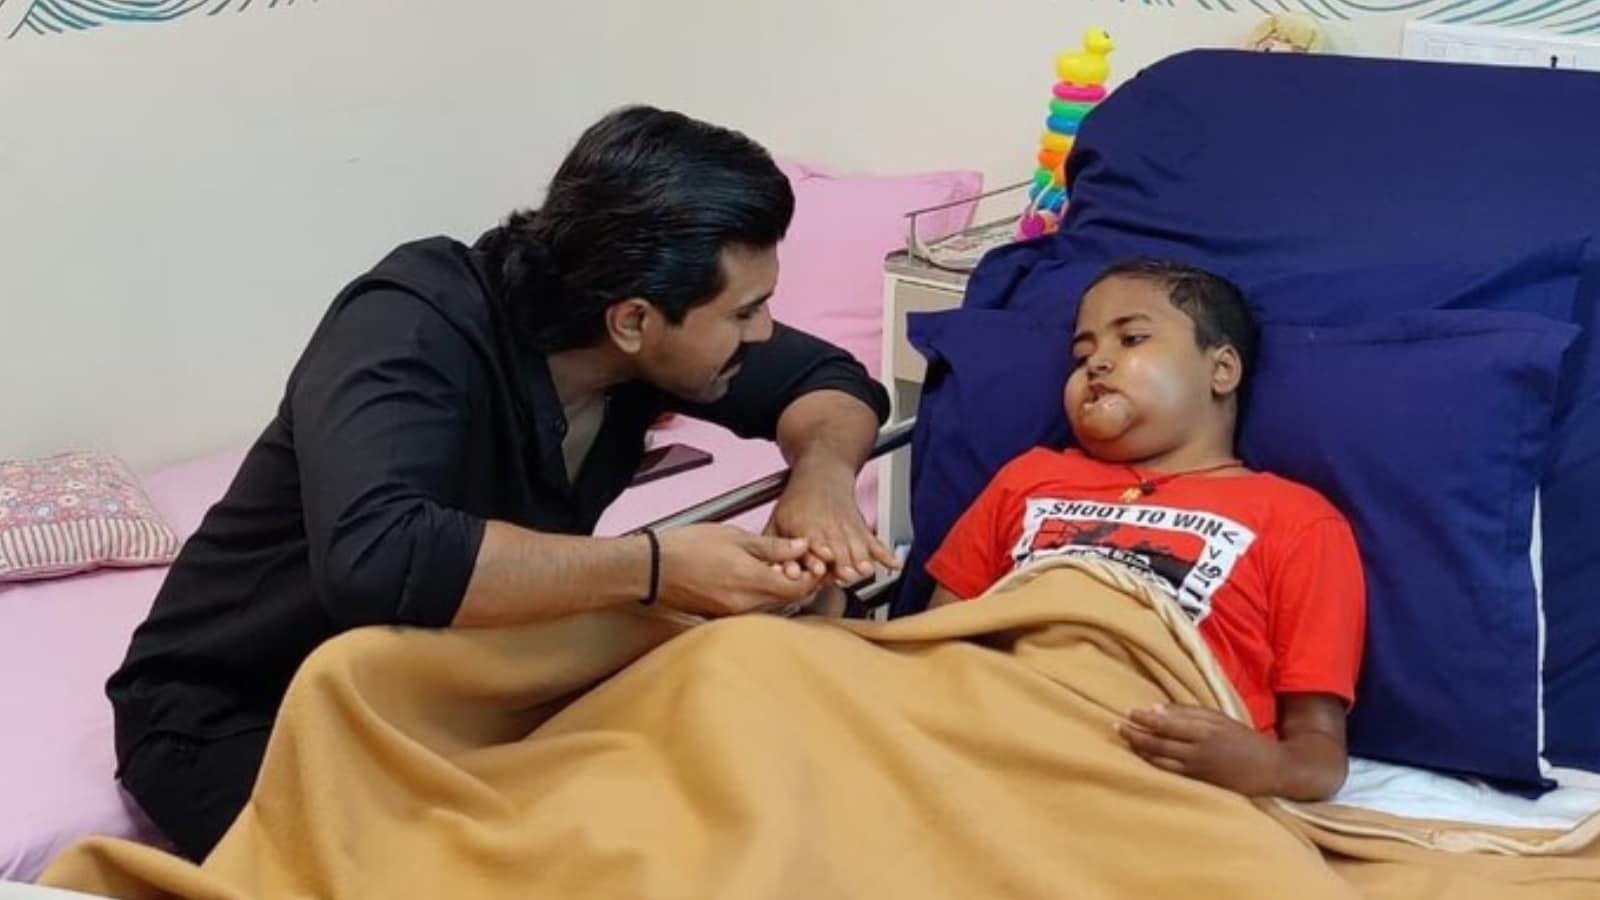 Ram Charan visits a 9-year-old cancer patient, see pics